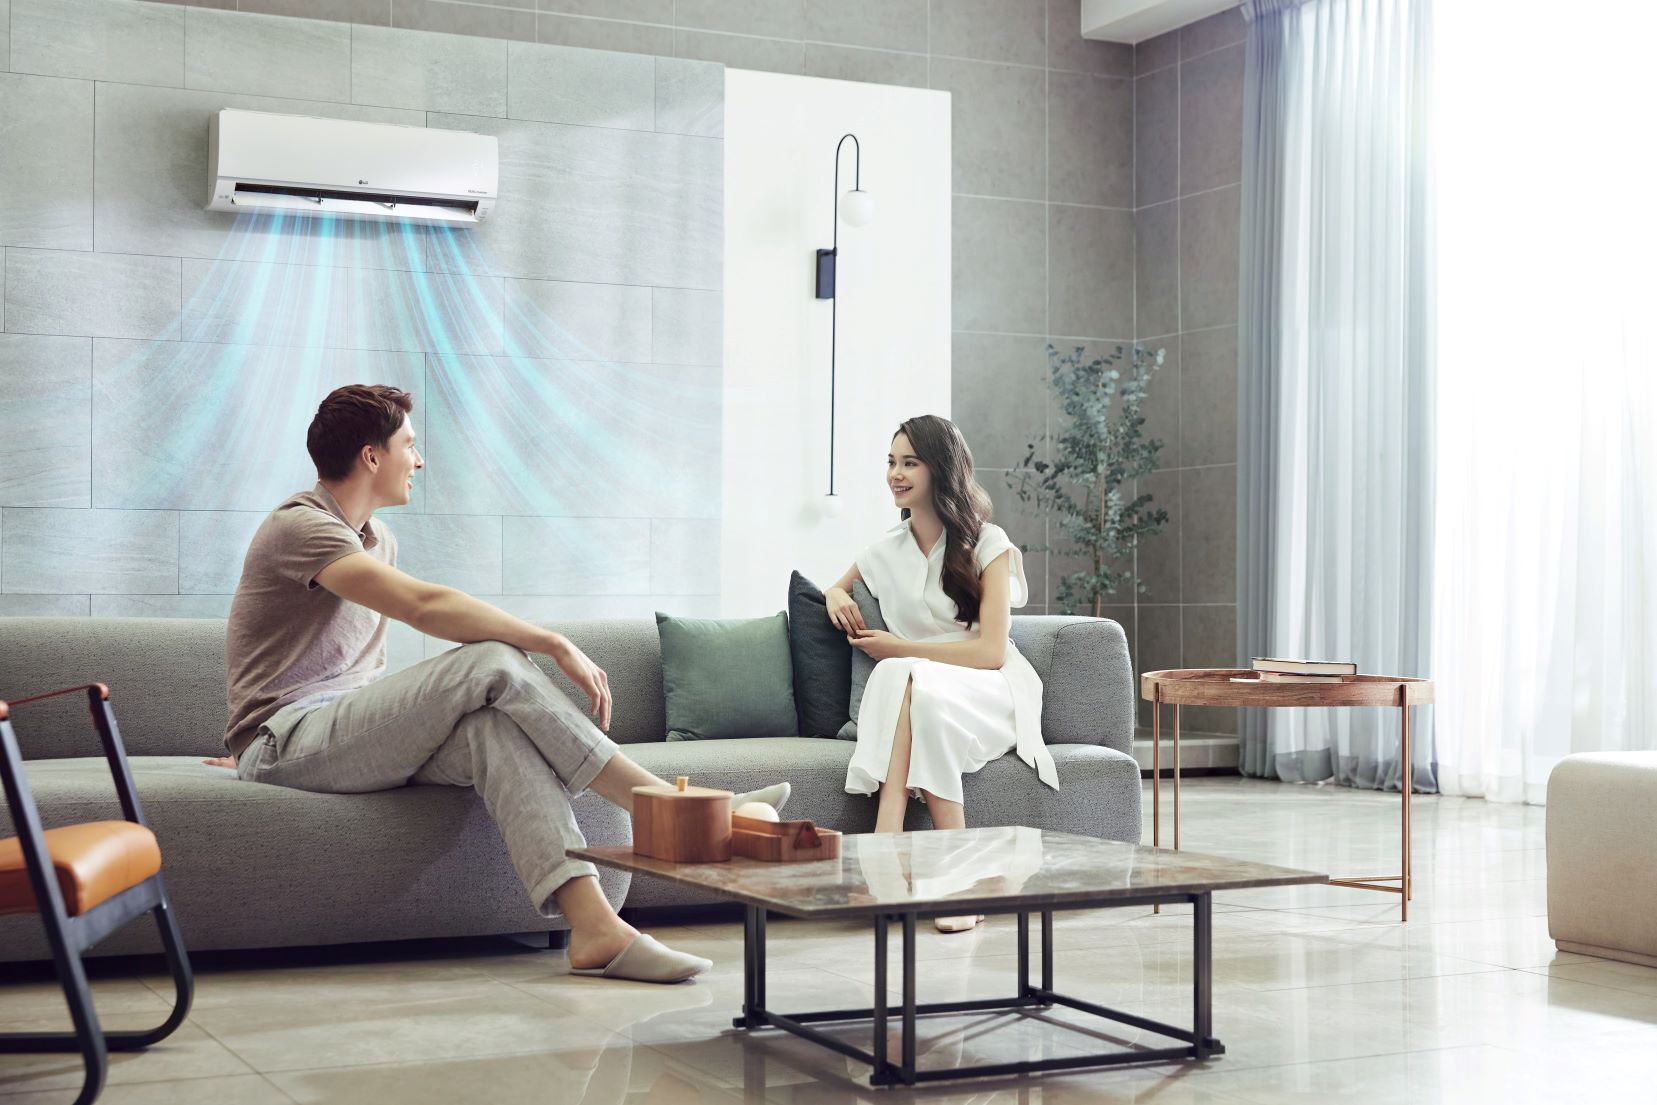 LG DUALCOOL in livingroom with one male and one female talking each other